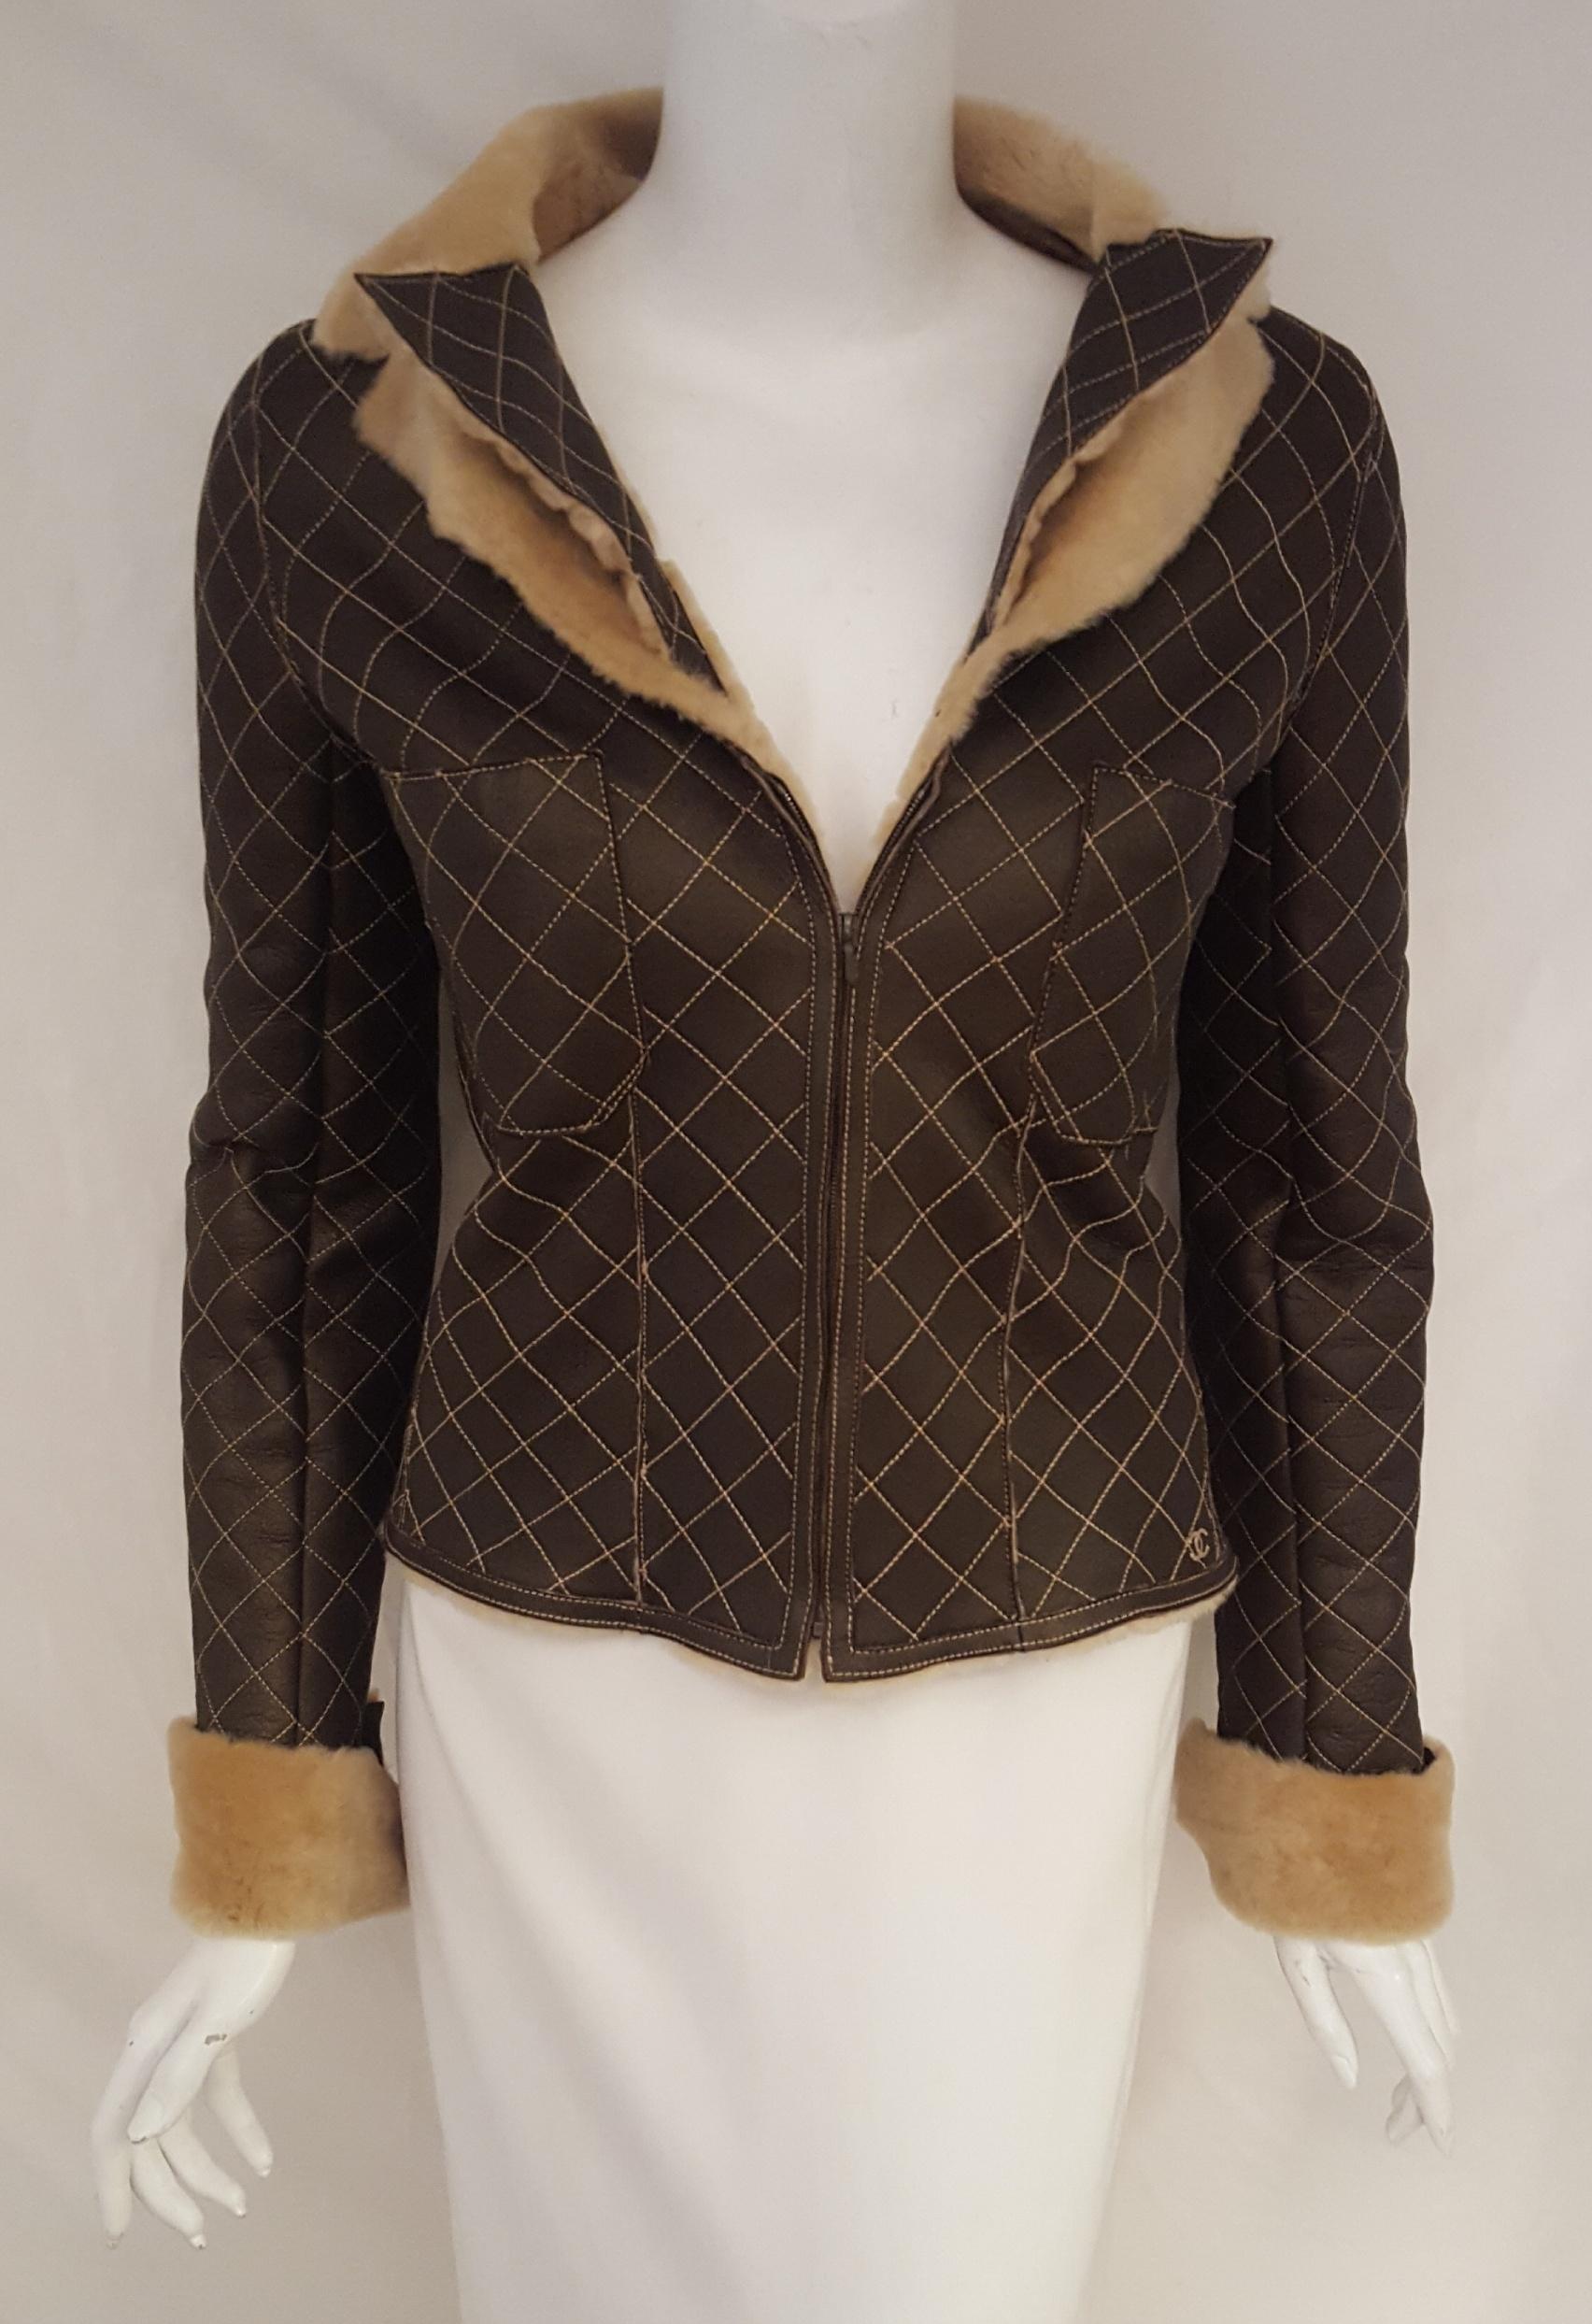 Black Chanel Brown Quilted Lambskin Shearling Jacket From Fall 2004 